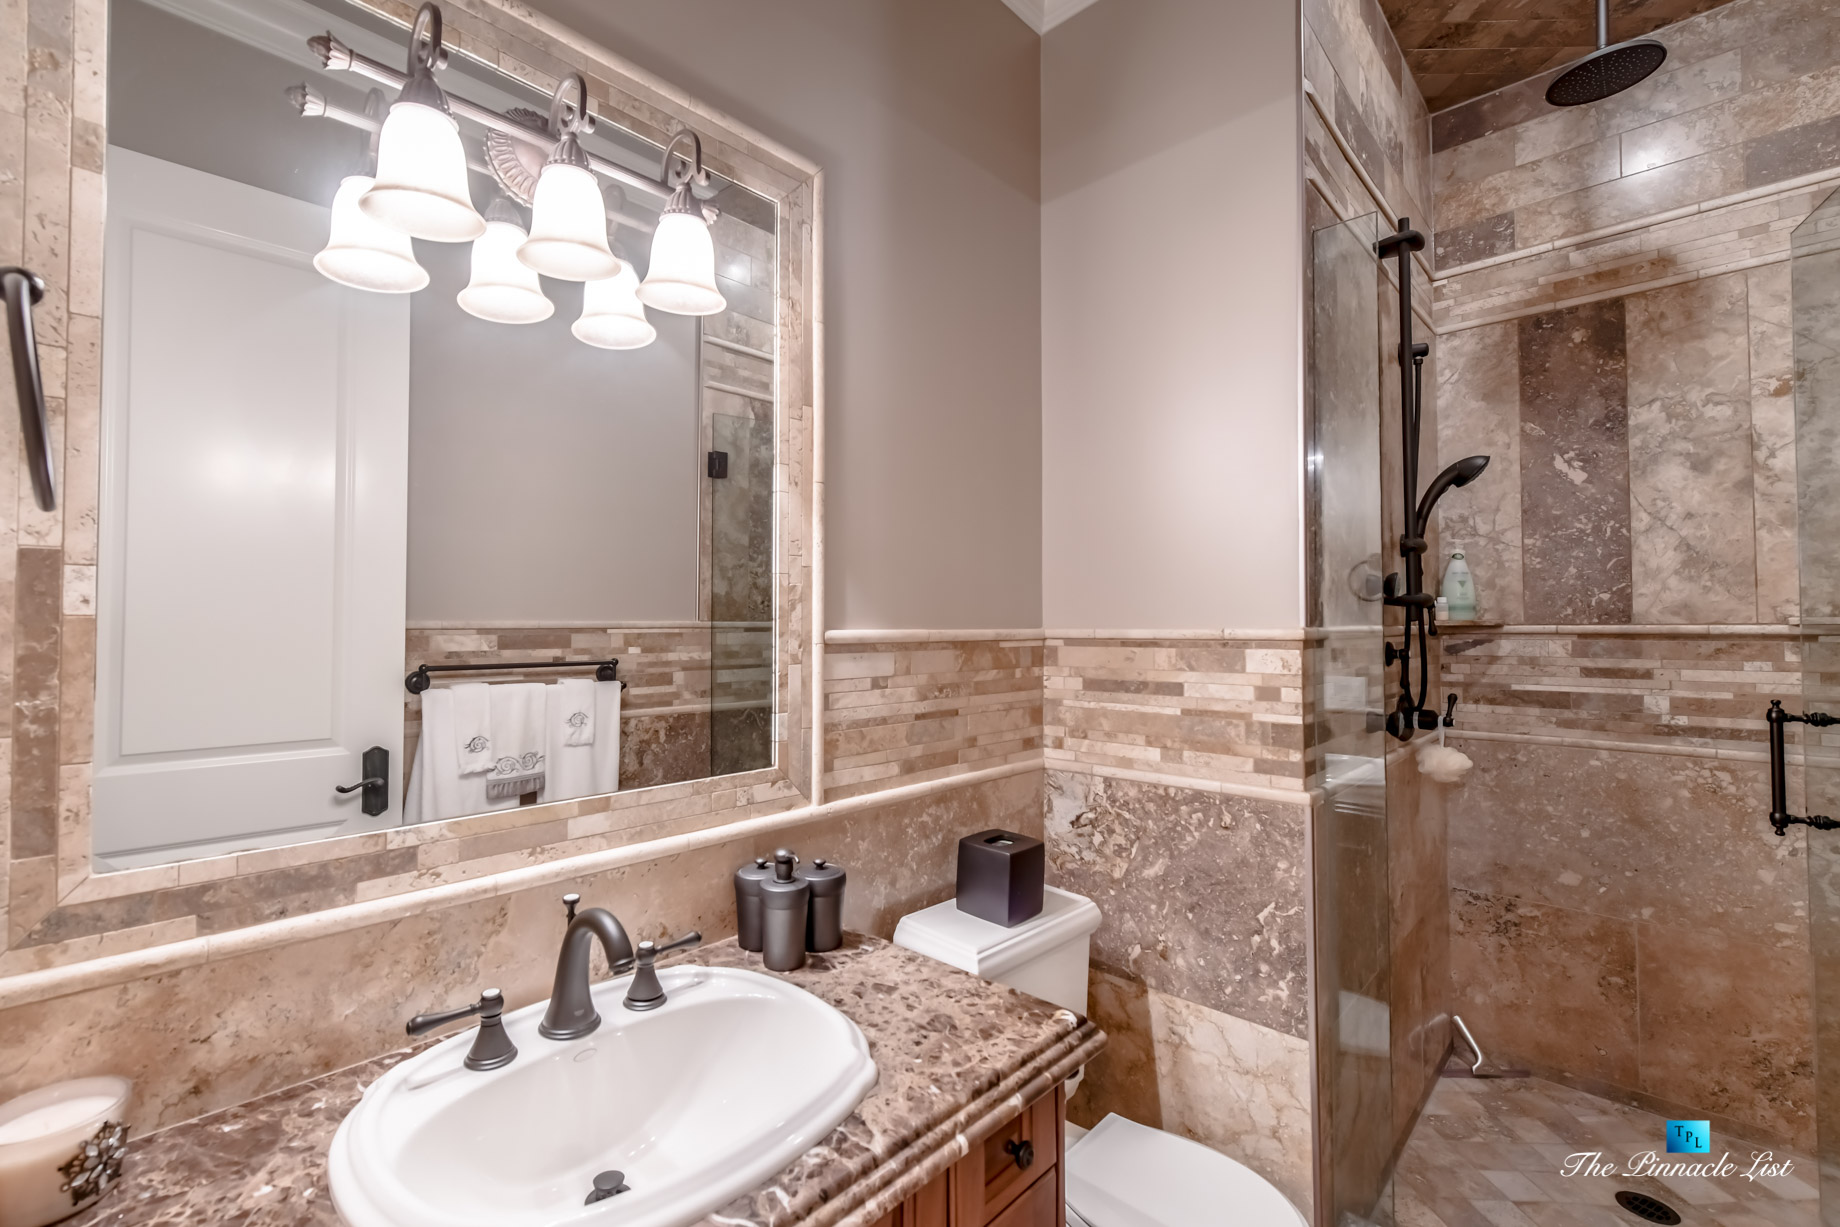 3053 Anmore Creek Way, Anmore, BC, Canada - Guest Bathroom - Luxury Real Estate - Greater Vancouver Home